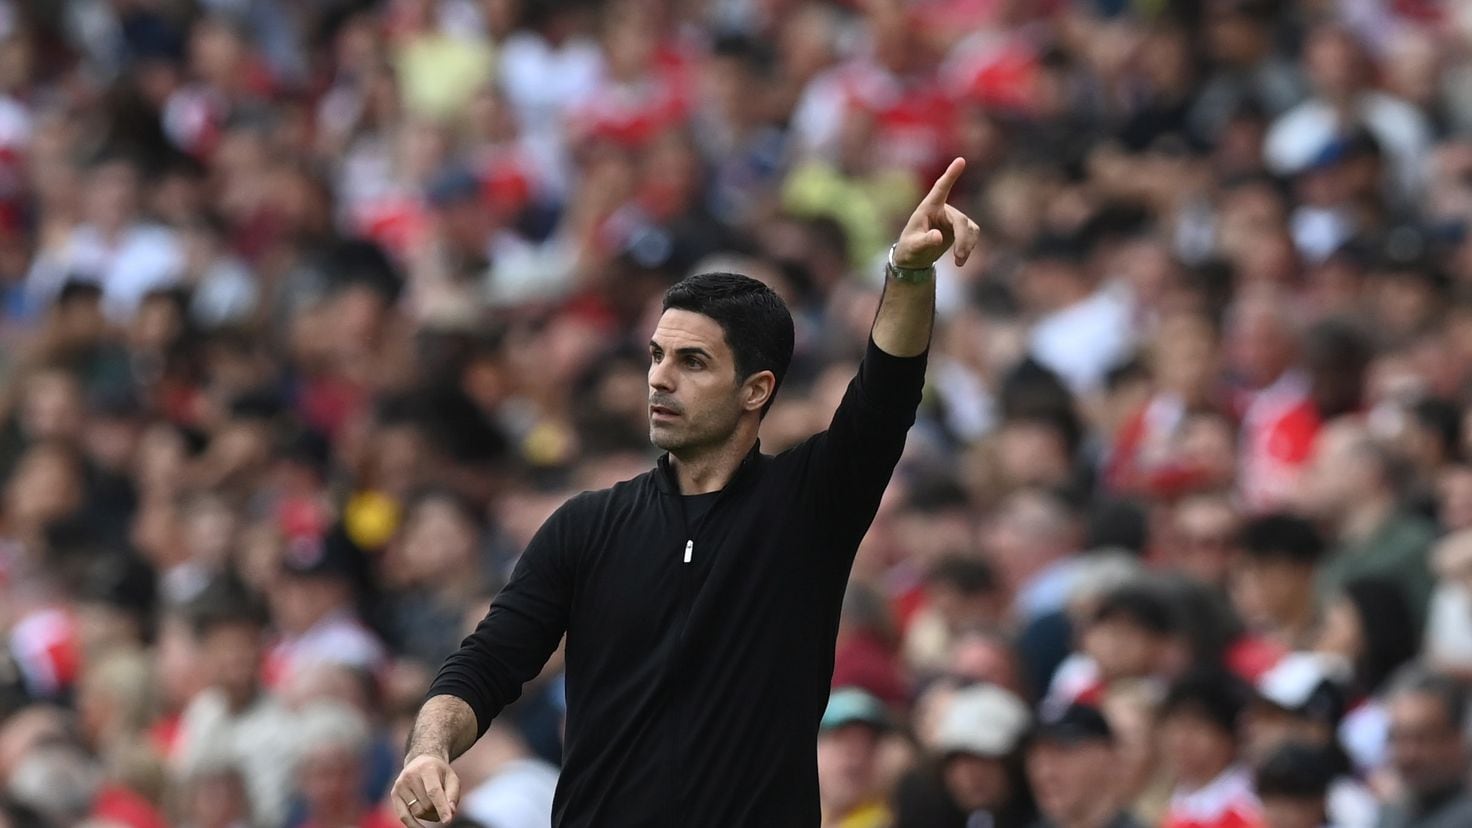 Adams: “The best thing for Arsenal would be to get rid of Arteta”